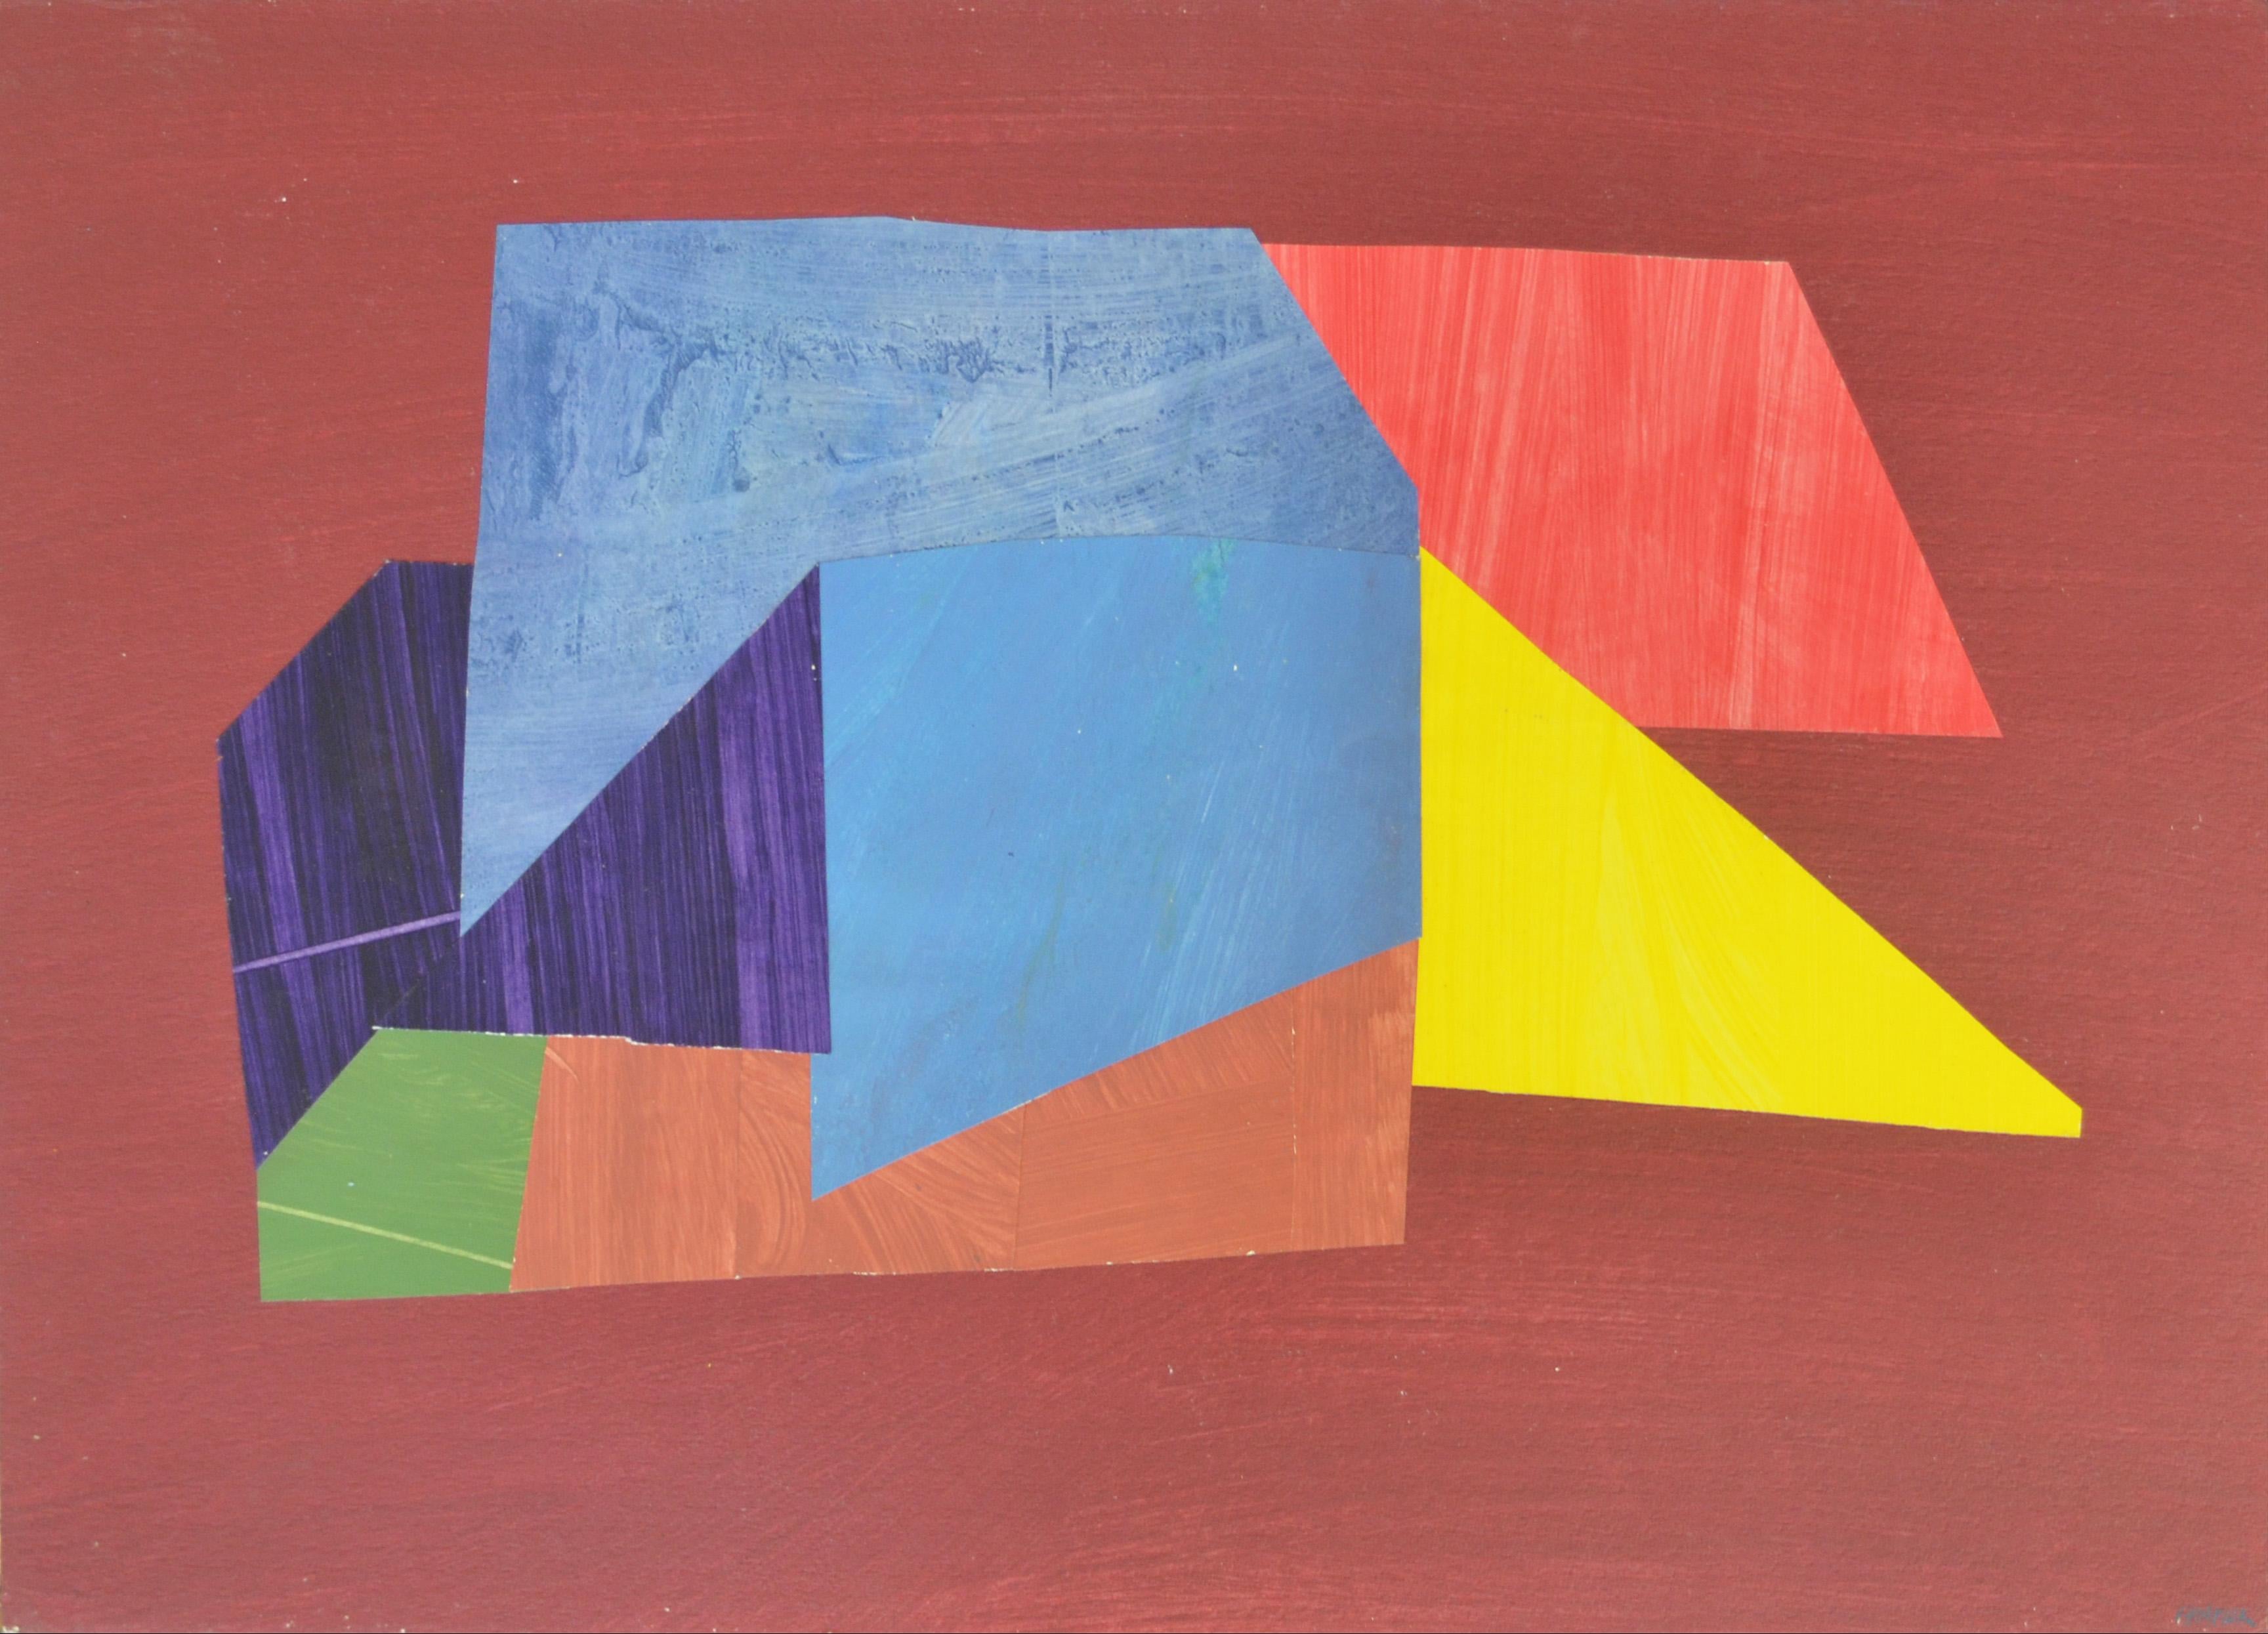 Edward Pramuk Landscape Painting - "Shelter with Yellow" 1978, Mixed Media and Rag Paper Collage on Paper, Abstract